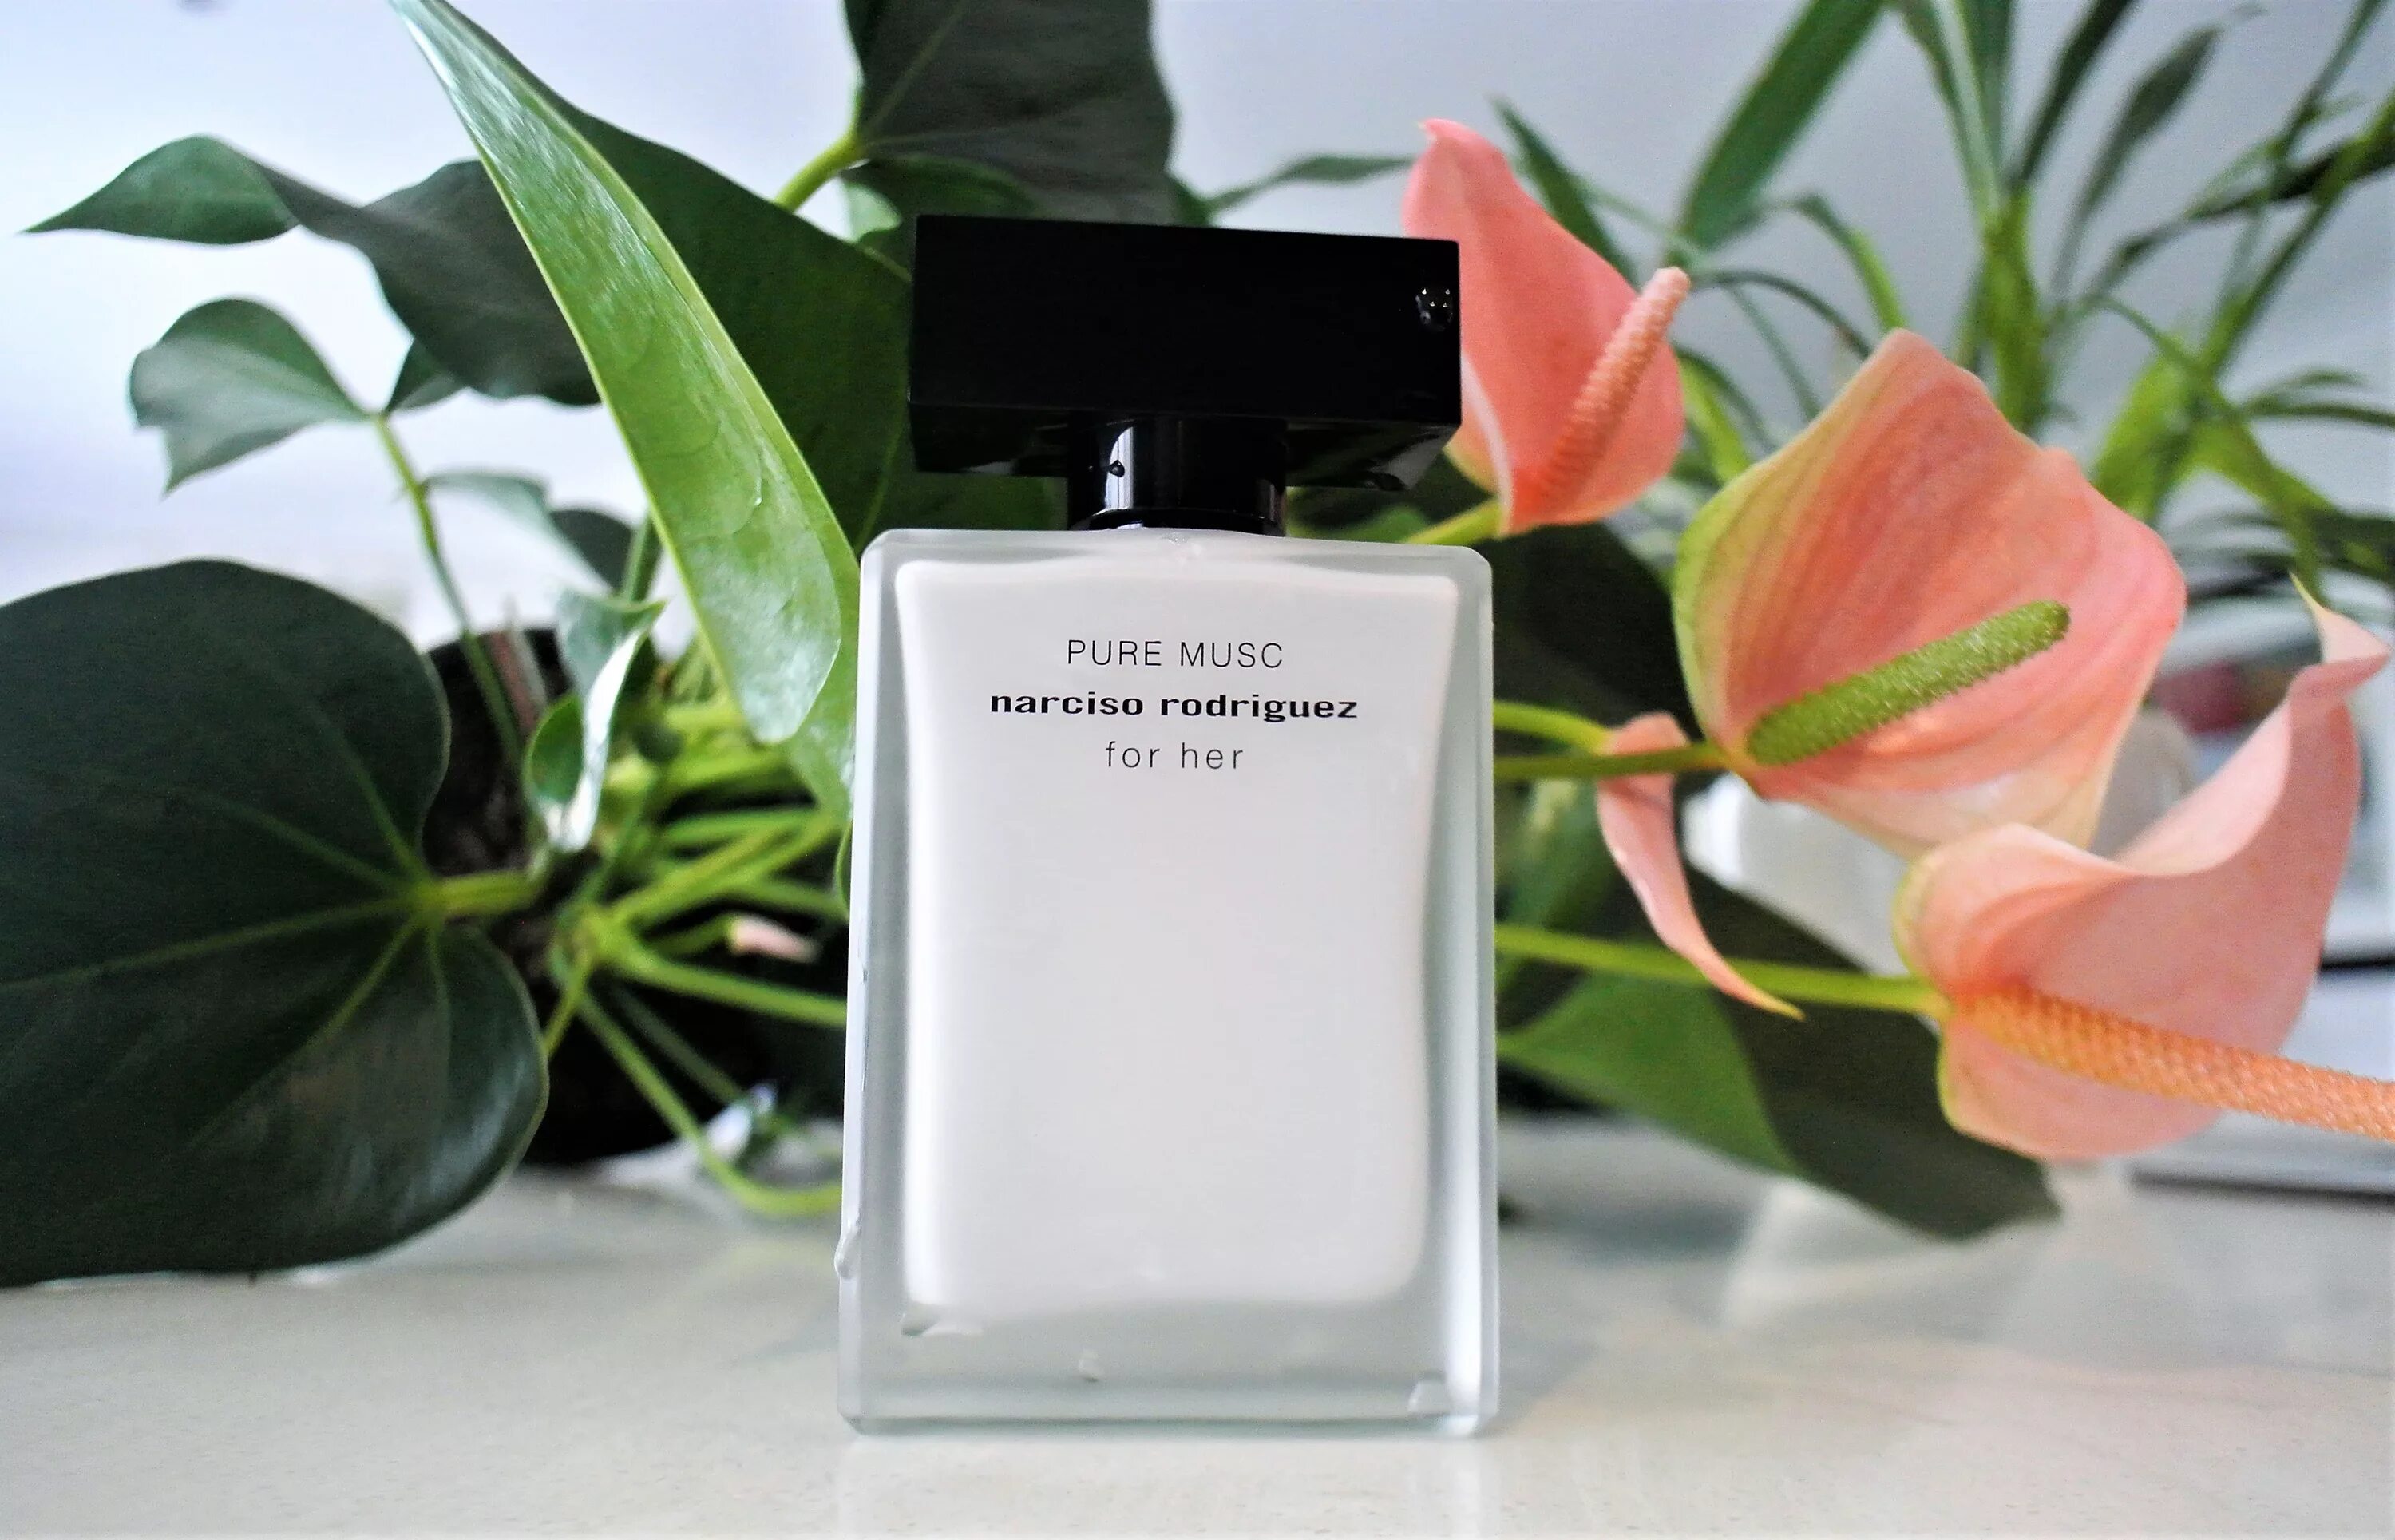 Narciso rodriguez musc купить. Narciso Rodriguez for her Pure Musc EDP 20ml. Narciso Rodriguez Pure Musc for her 30ml EDP. EDP Narciso Rodriguez Pure Musc for her 50 ml. Pure Musk Narciso Rodriguez for her.